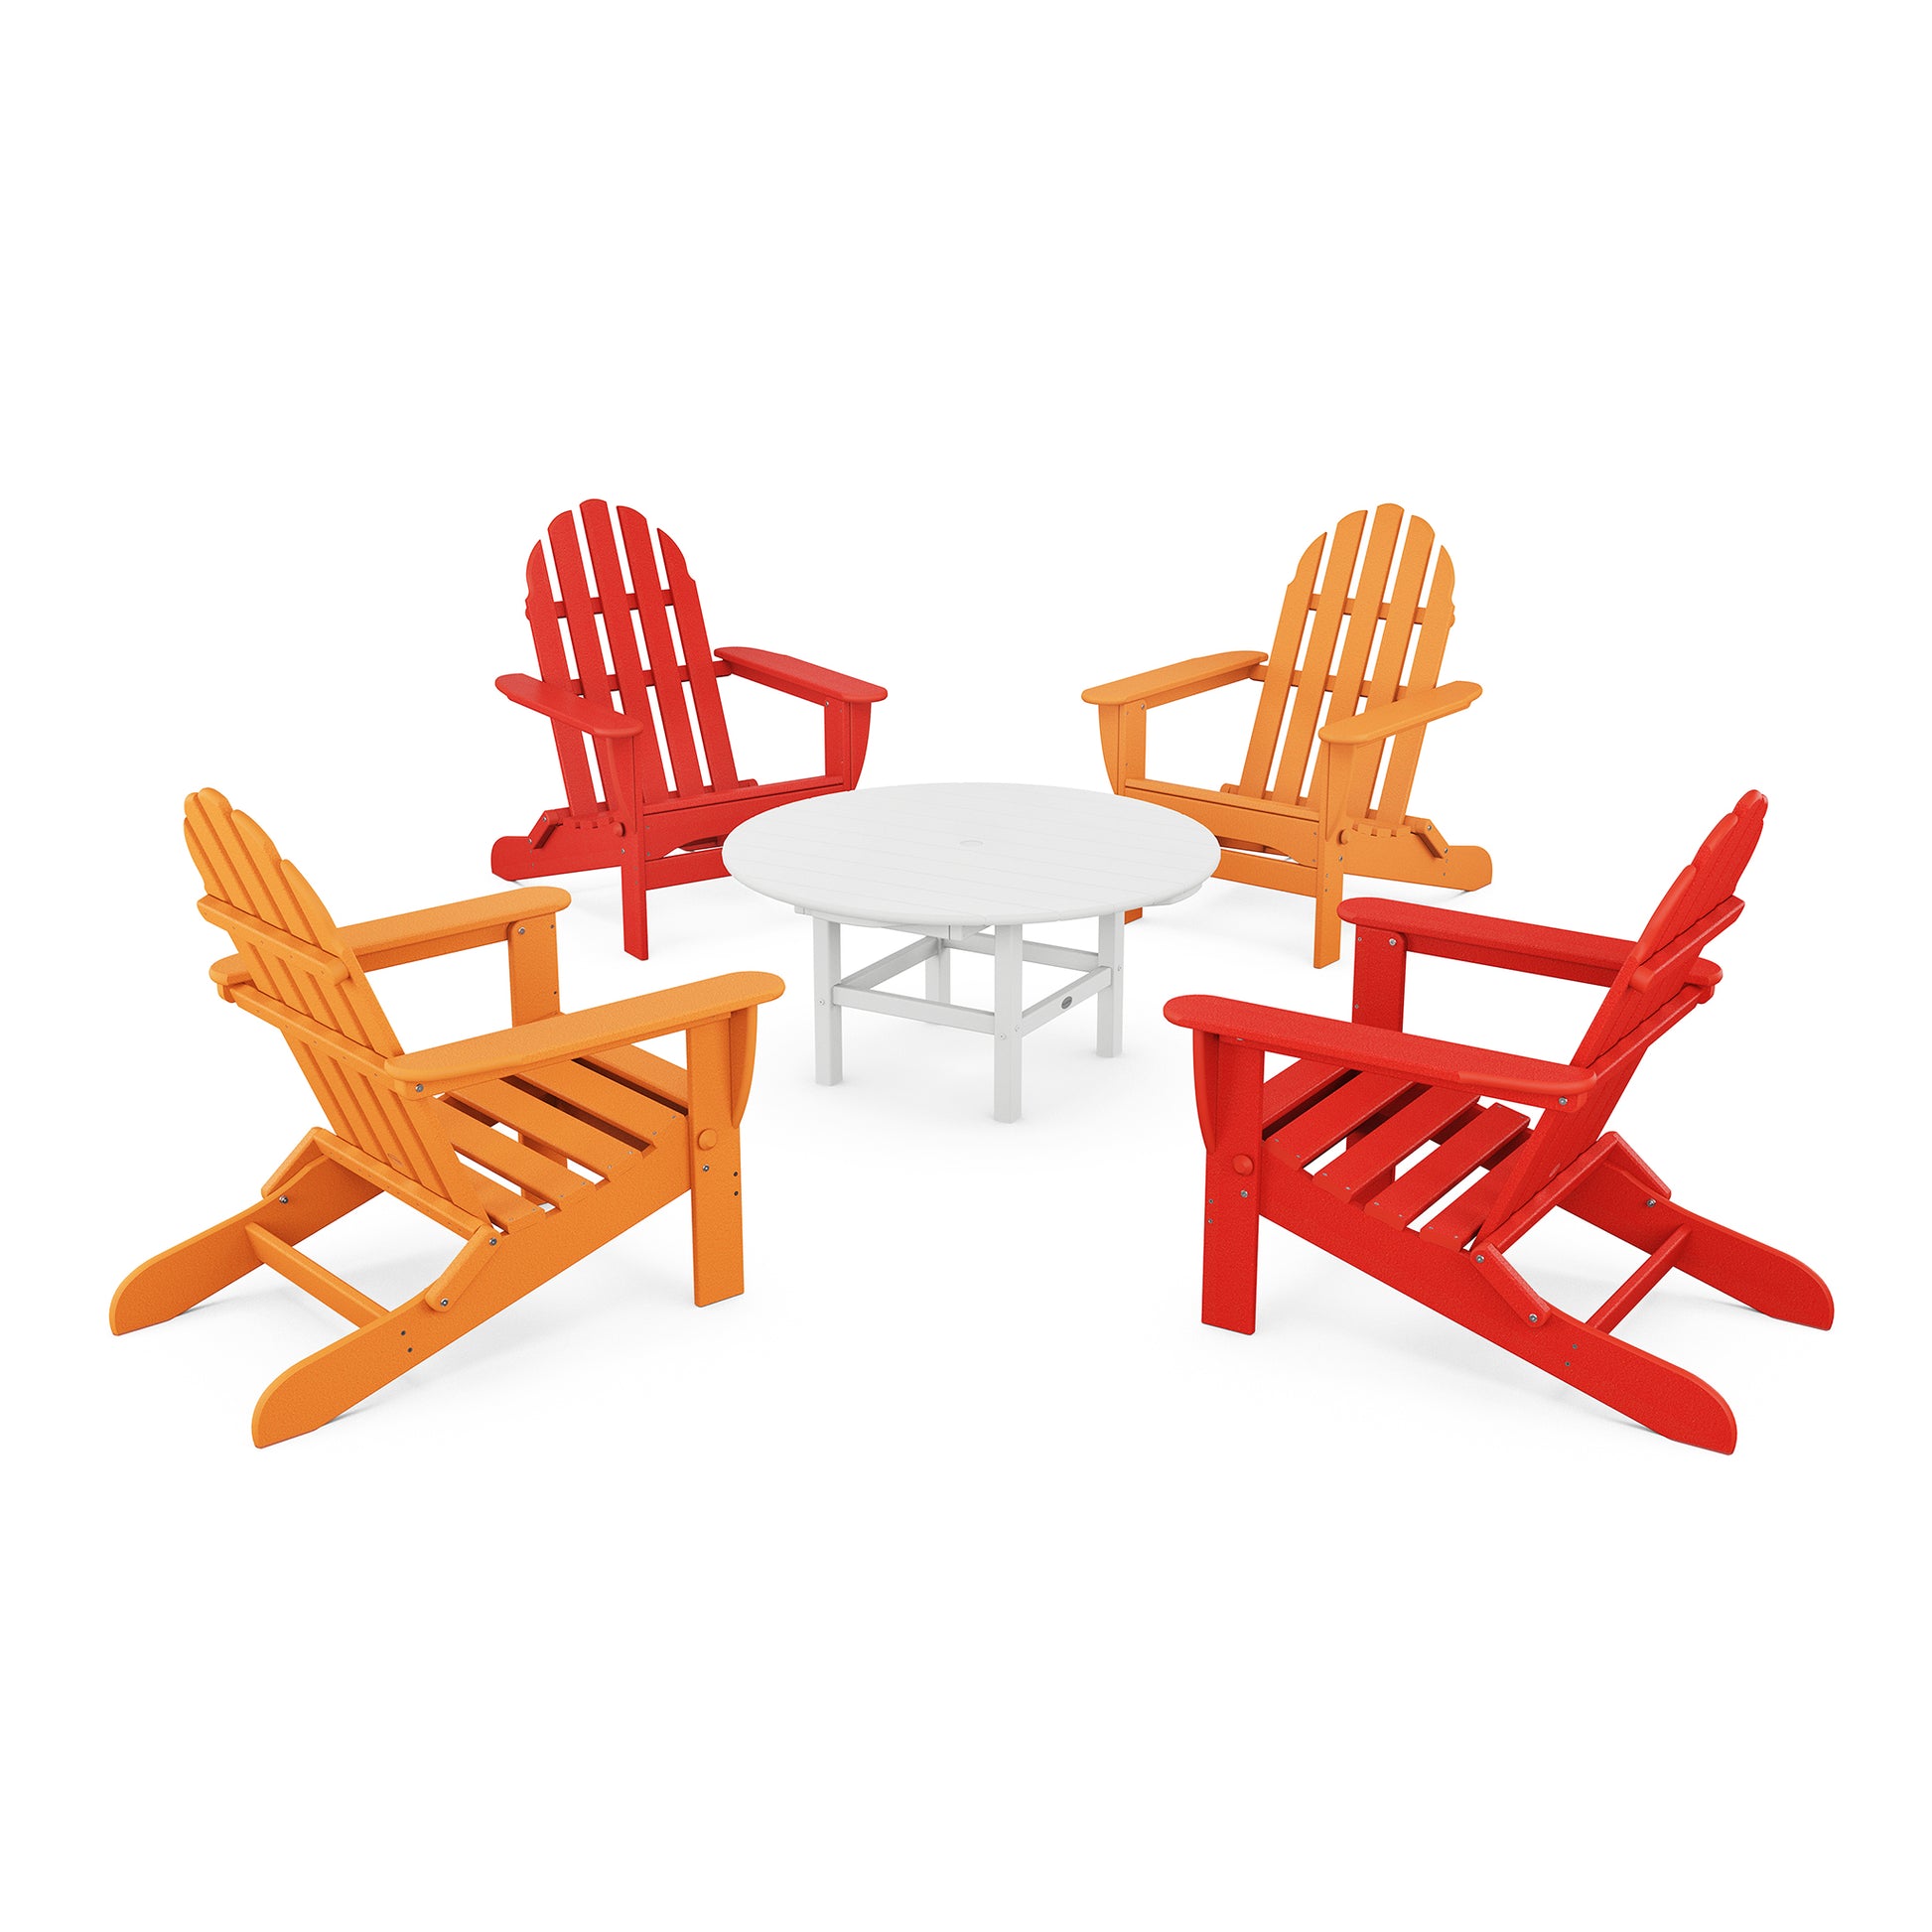 Four POLYWOOD Classic Folding Adirondack chairs in orange and red colors arranged around a small white round table on a white background.